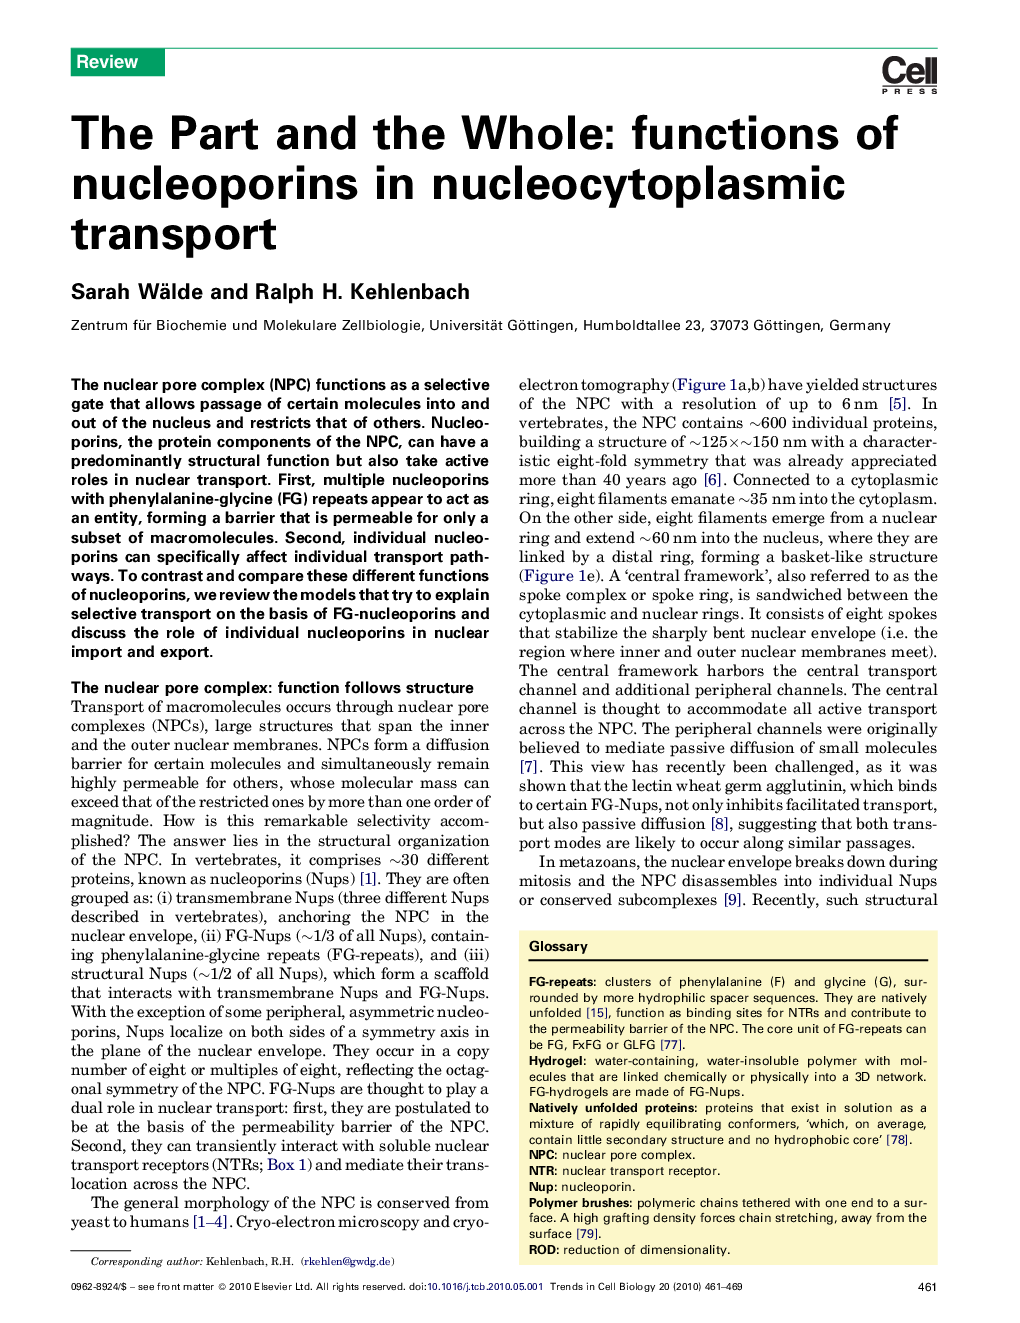 The Part and the Whole: functions of nucleoporins in nucleocytoplasmic transport